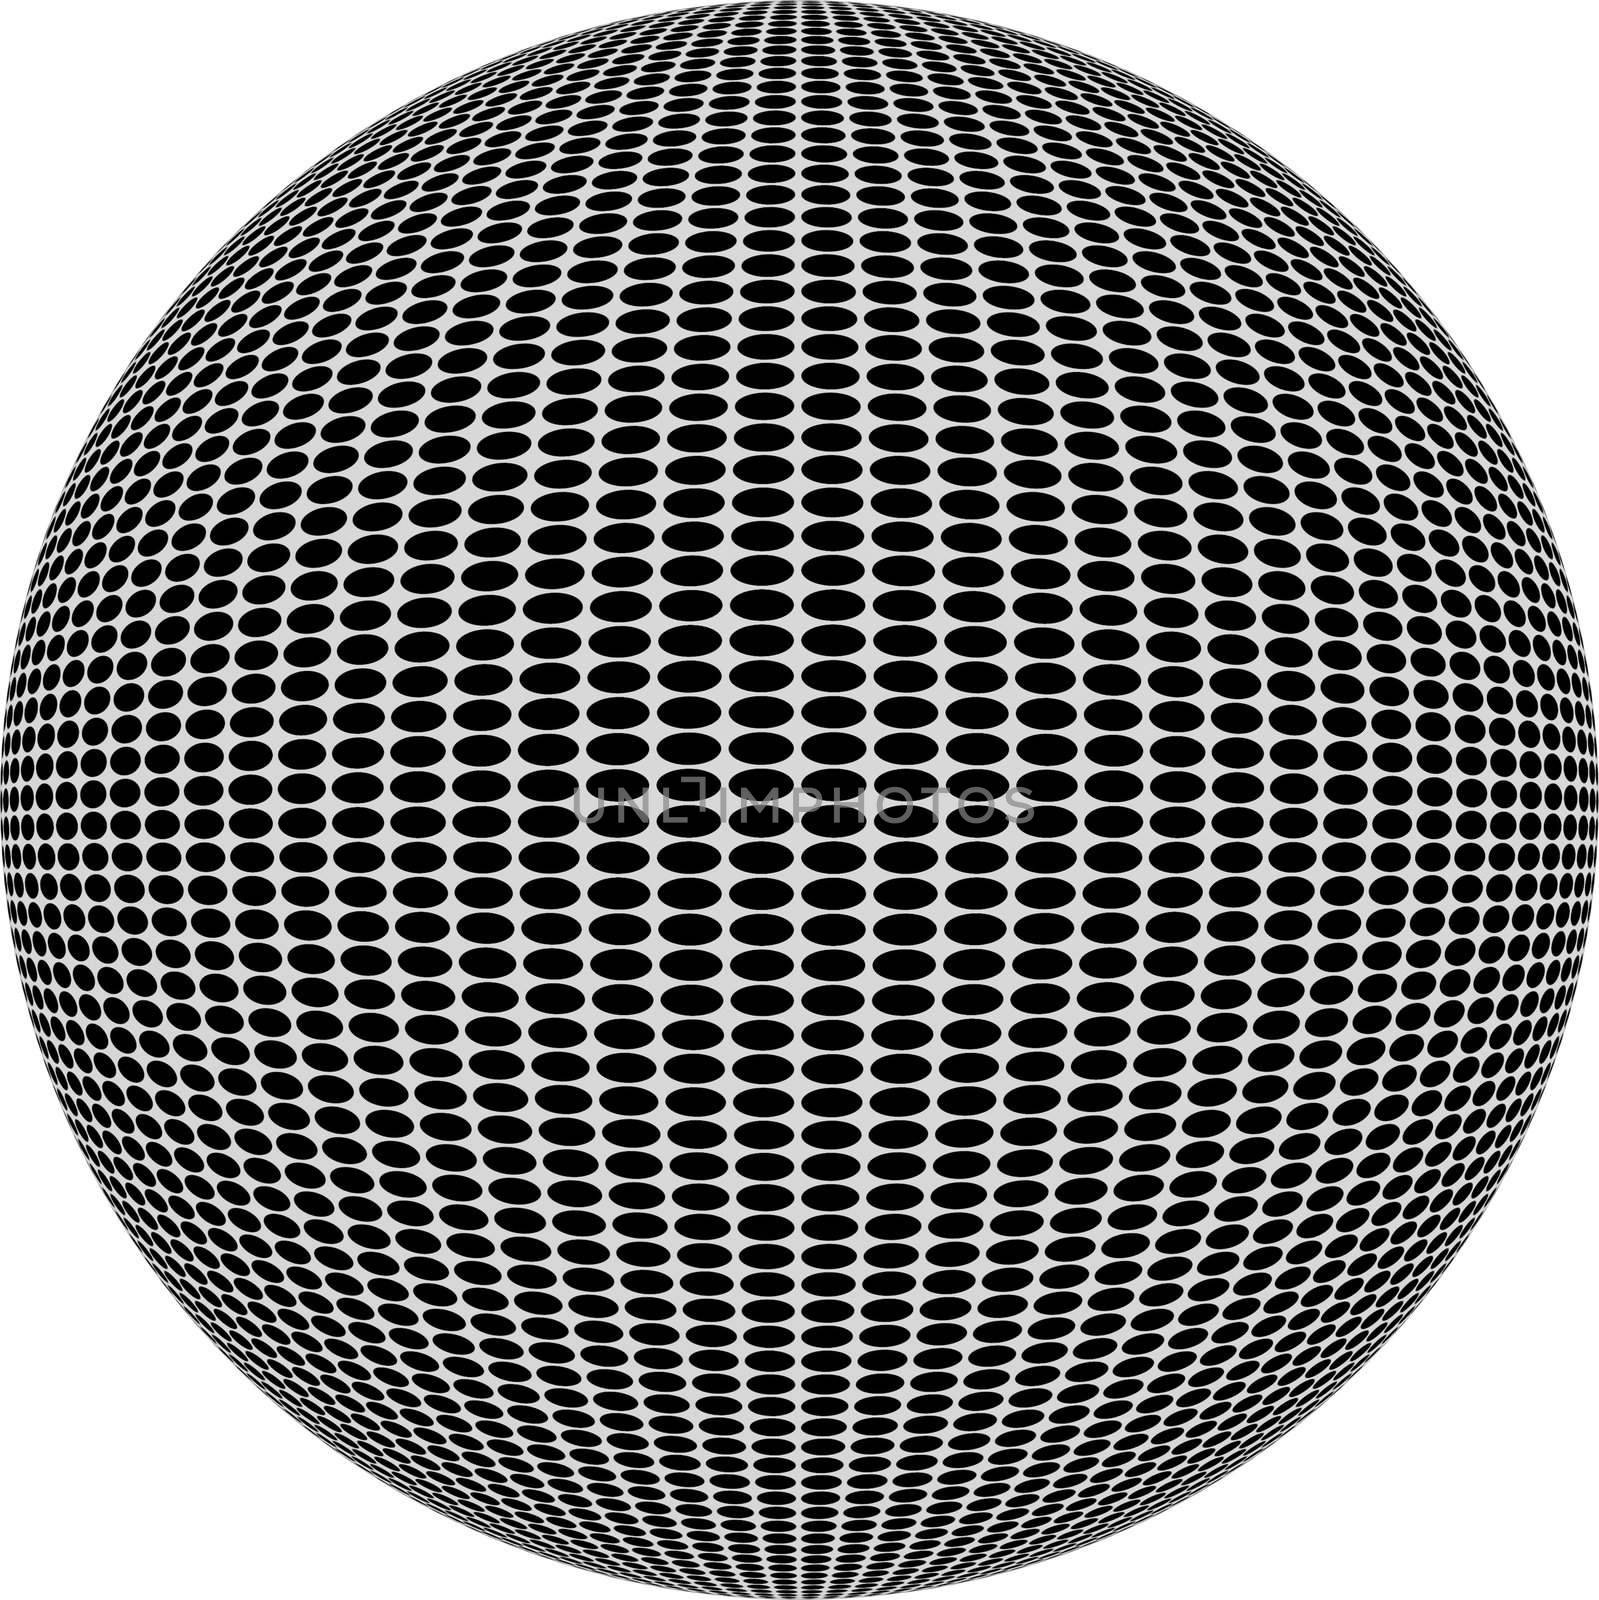 Pattern circles that are great for backgrounds and design inspiration. Has a white background.